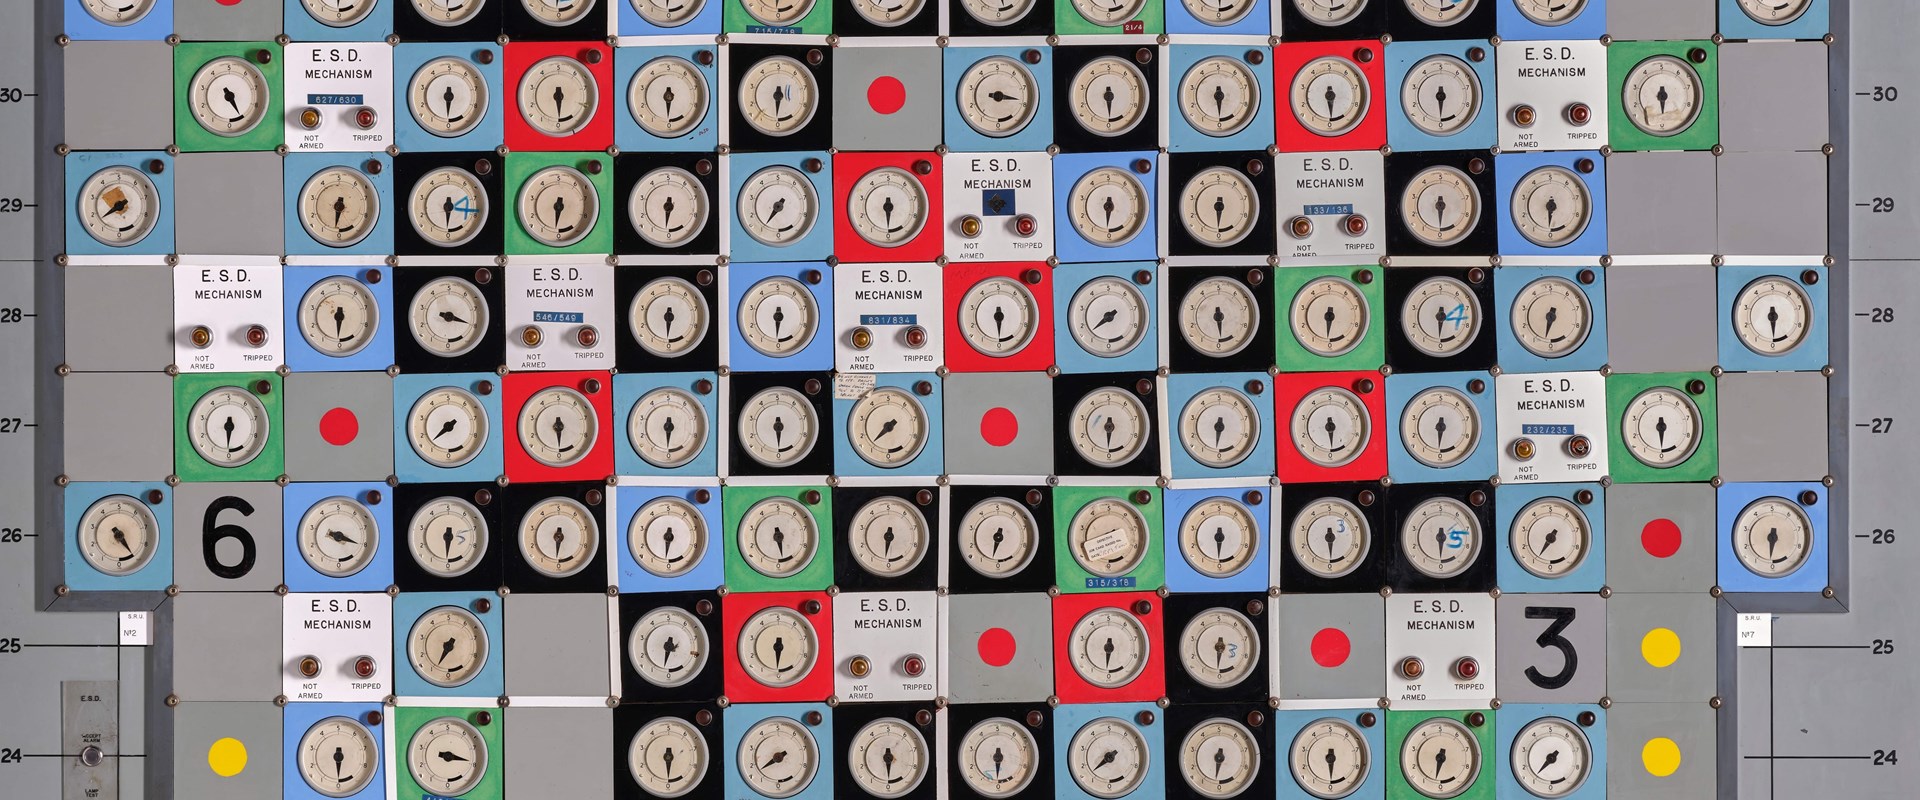 The Hunterston nuclear power station panel, showing lots of dials on red, blue, green and black squares on a grey machine.